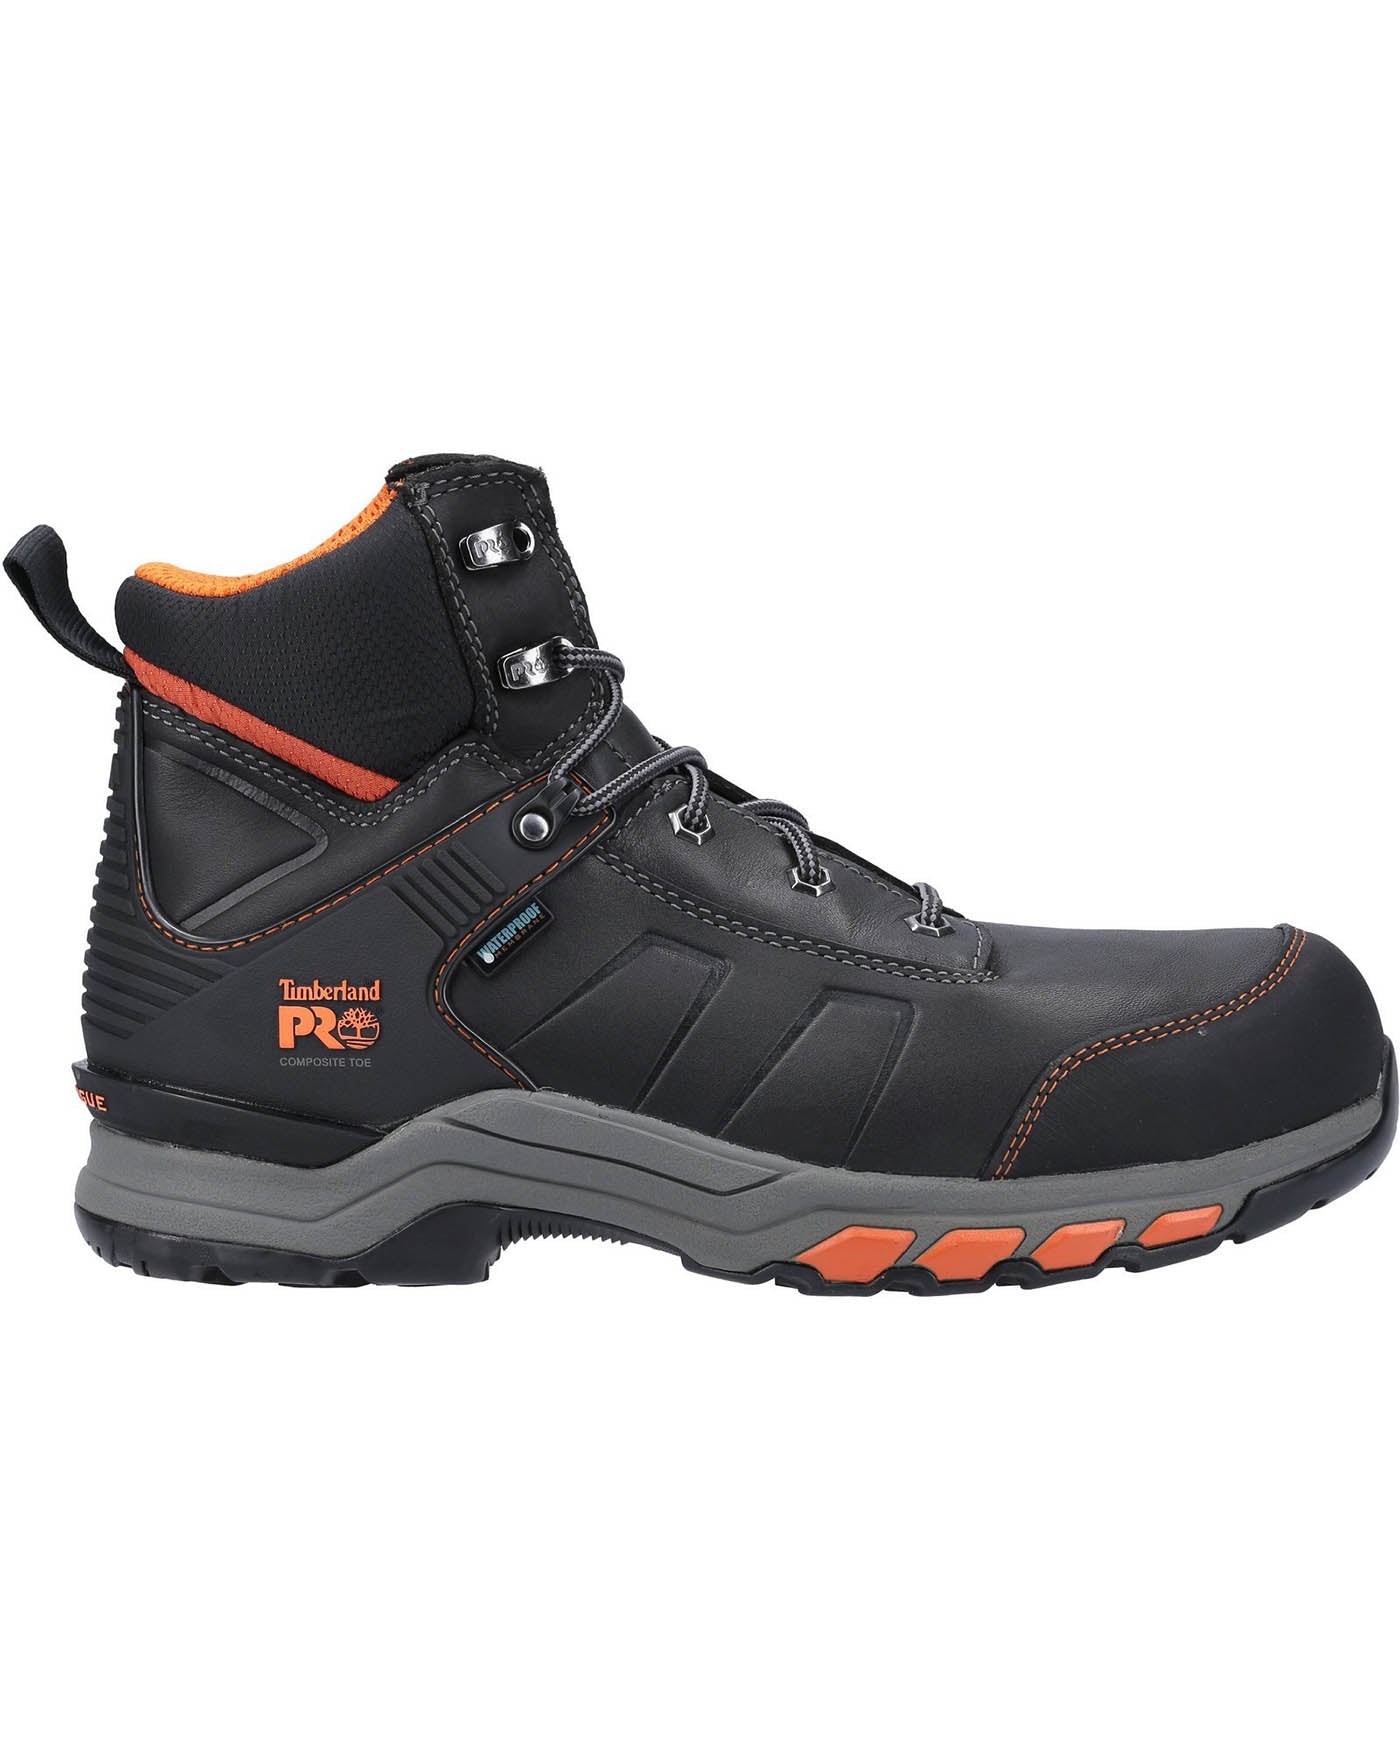 Timberland Pro Hypercharge Leather Safety Boots